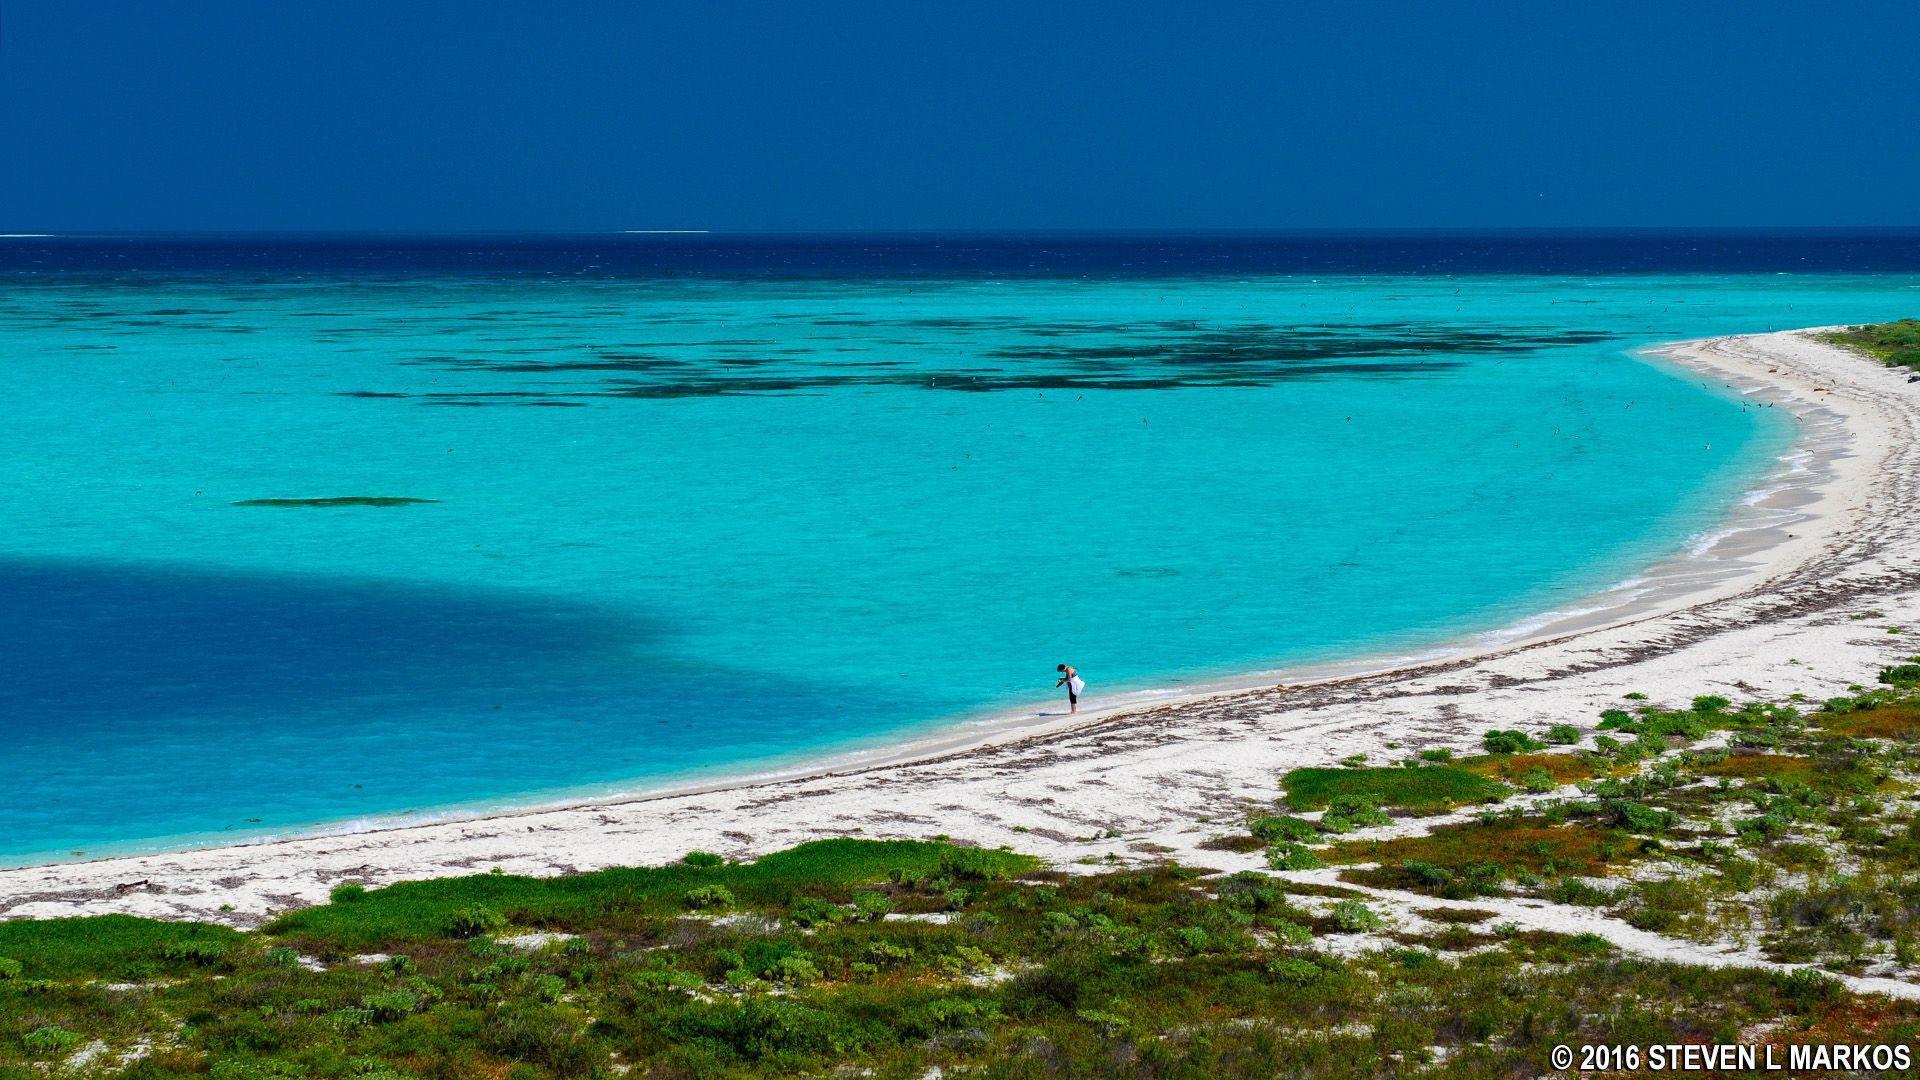 Dry Tortugas National Park. THE KEYS OF DRY TORTUGAS